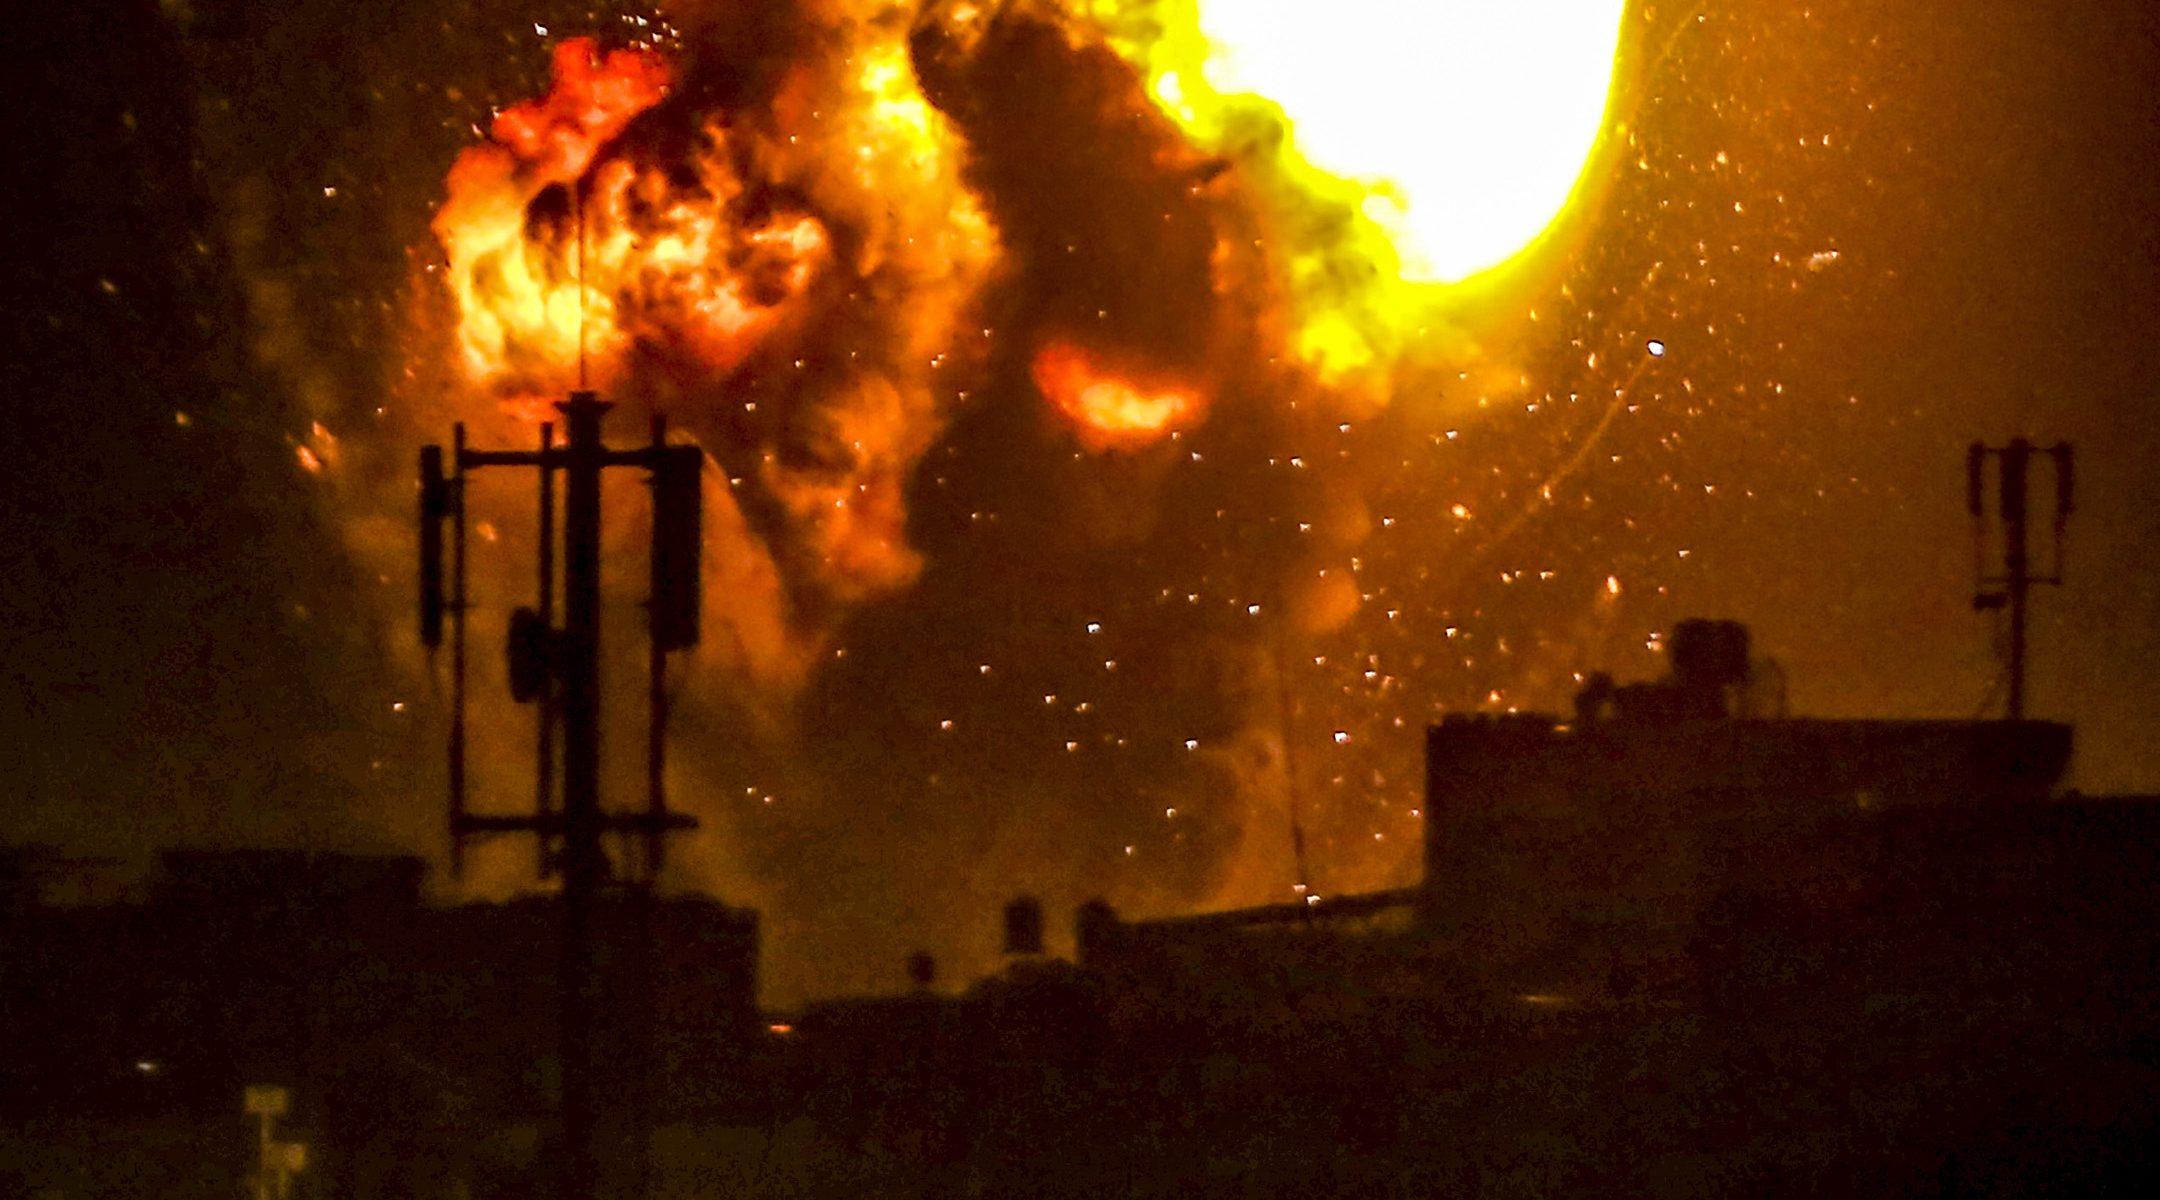 Israel Defense Forces strikes cause an explosion in Khan Yunes in the northern Gaza Strip on May 16, 2021. (Abed Rahim Khatib/FLASH90)